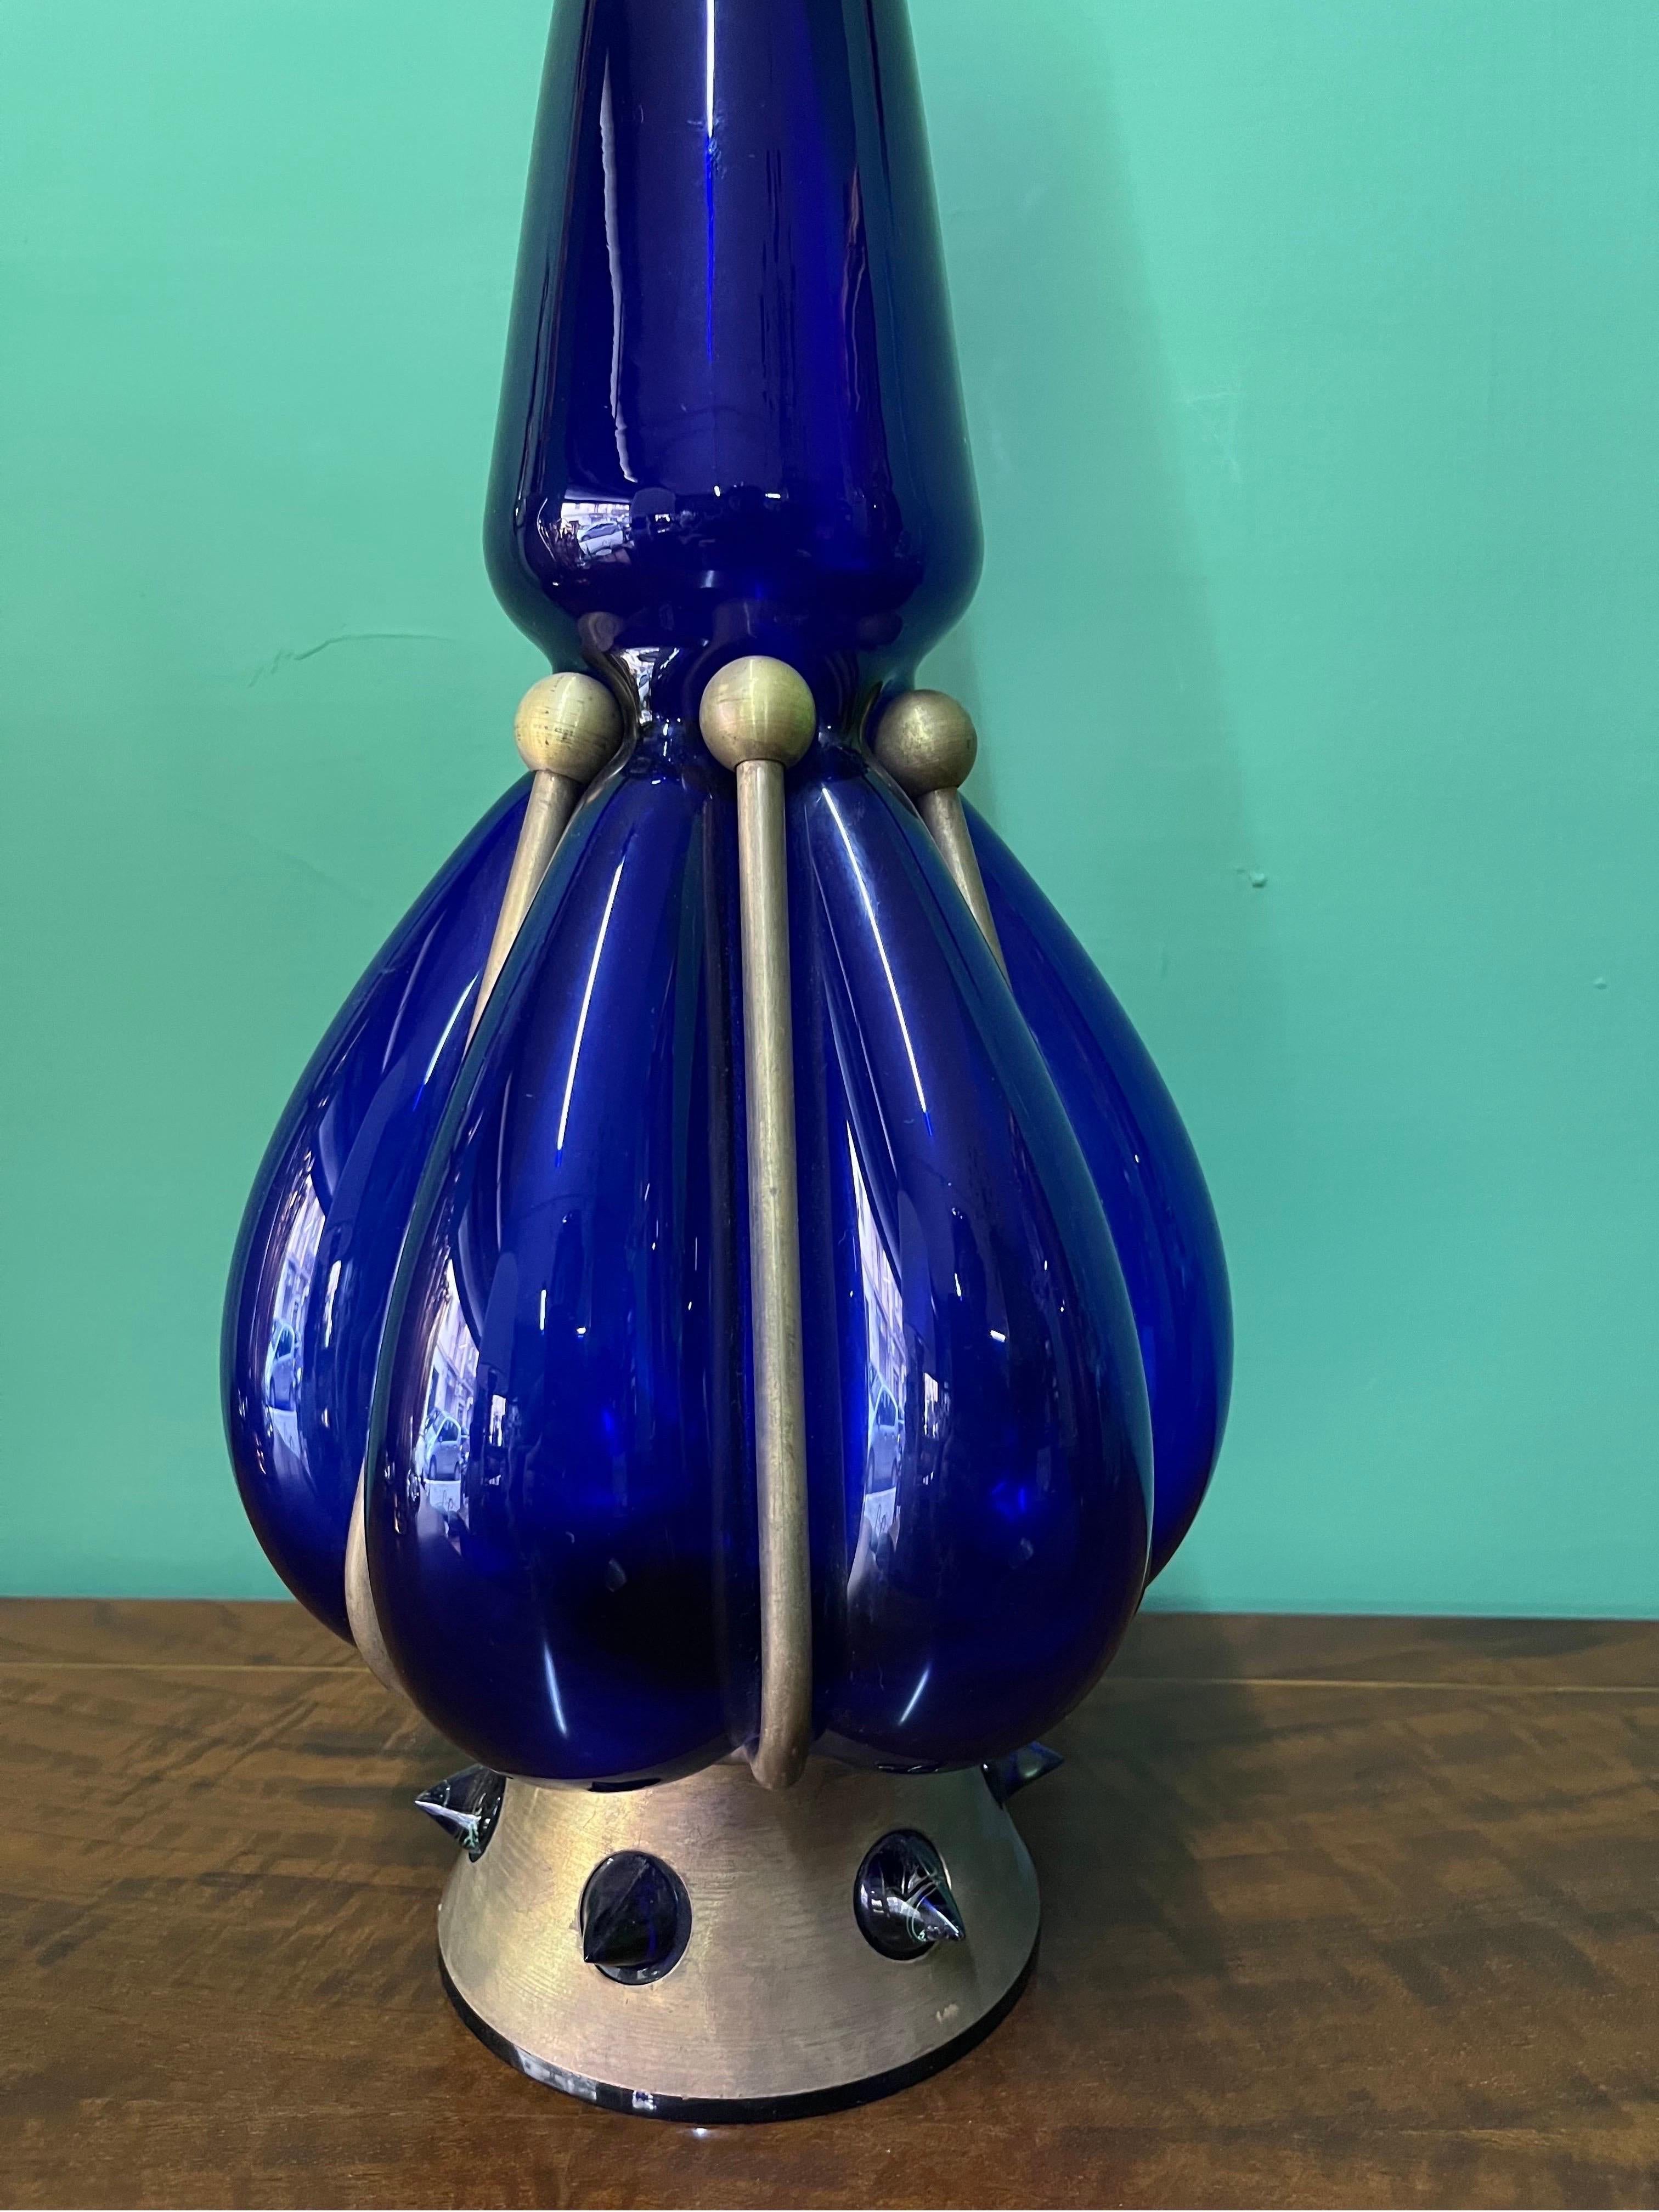 Vintage Blue Sculpture vase 1980s

Perfect Condition 

Very nice and ideal as Christmas Gift

Measures

Cm 55 h x 20 diameter x cm
12 base.